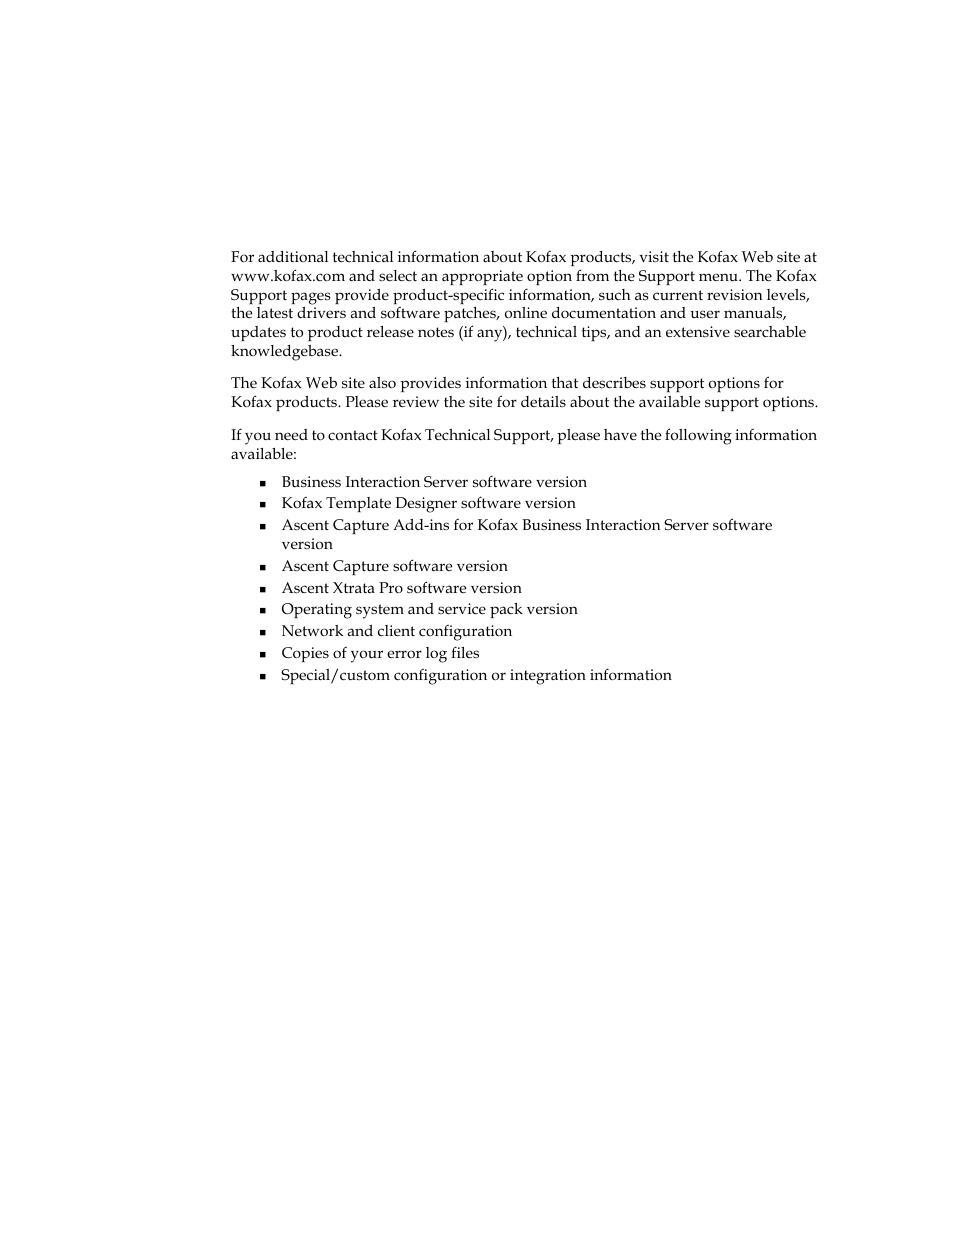 Kofax technical support | Kofax Business Interaction Server User Manual | Page 7 / 28